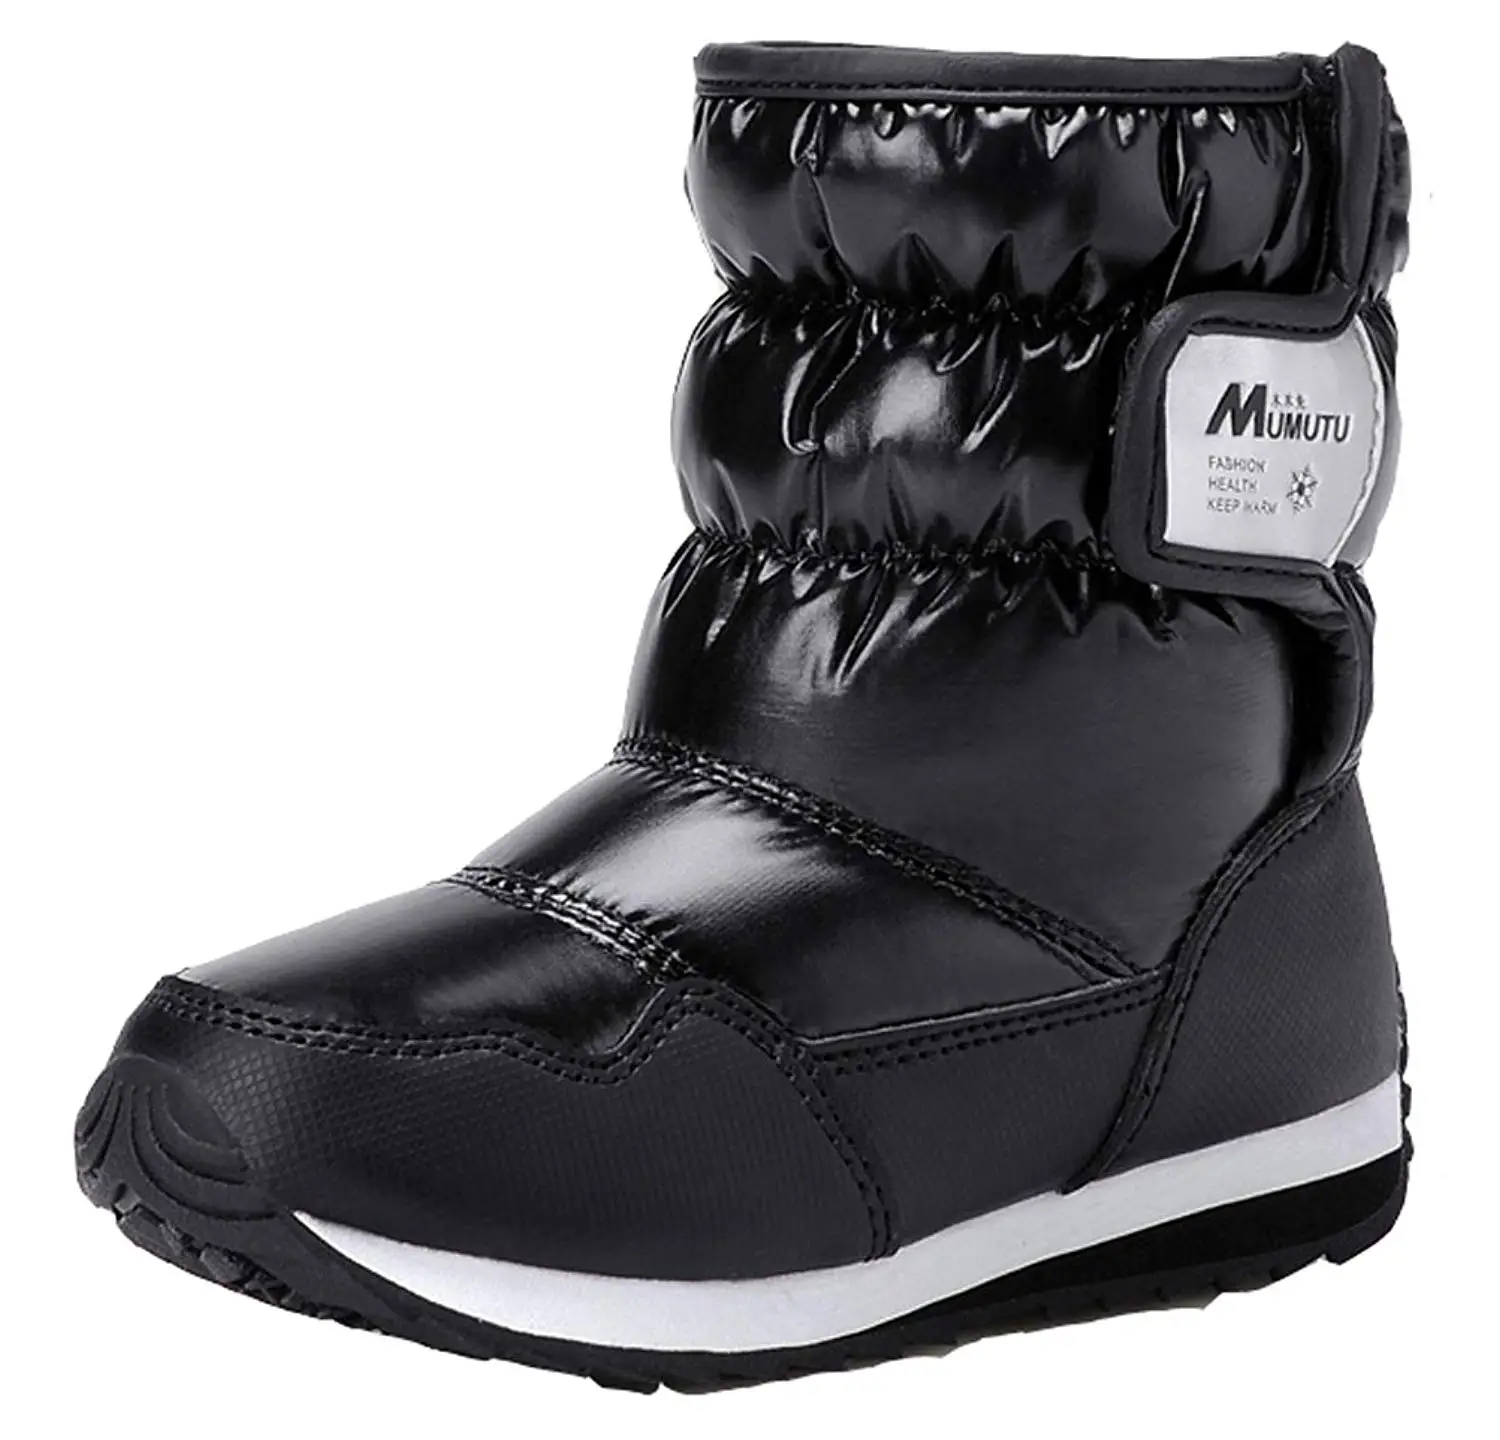 boys wide hiking boots